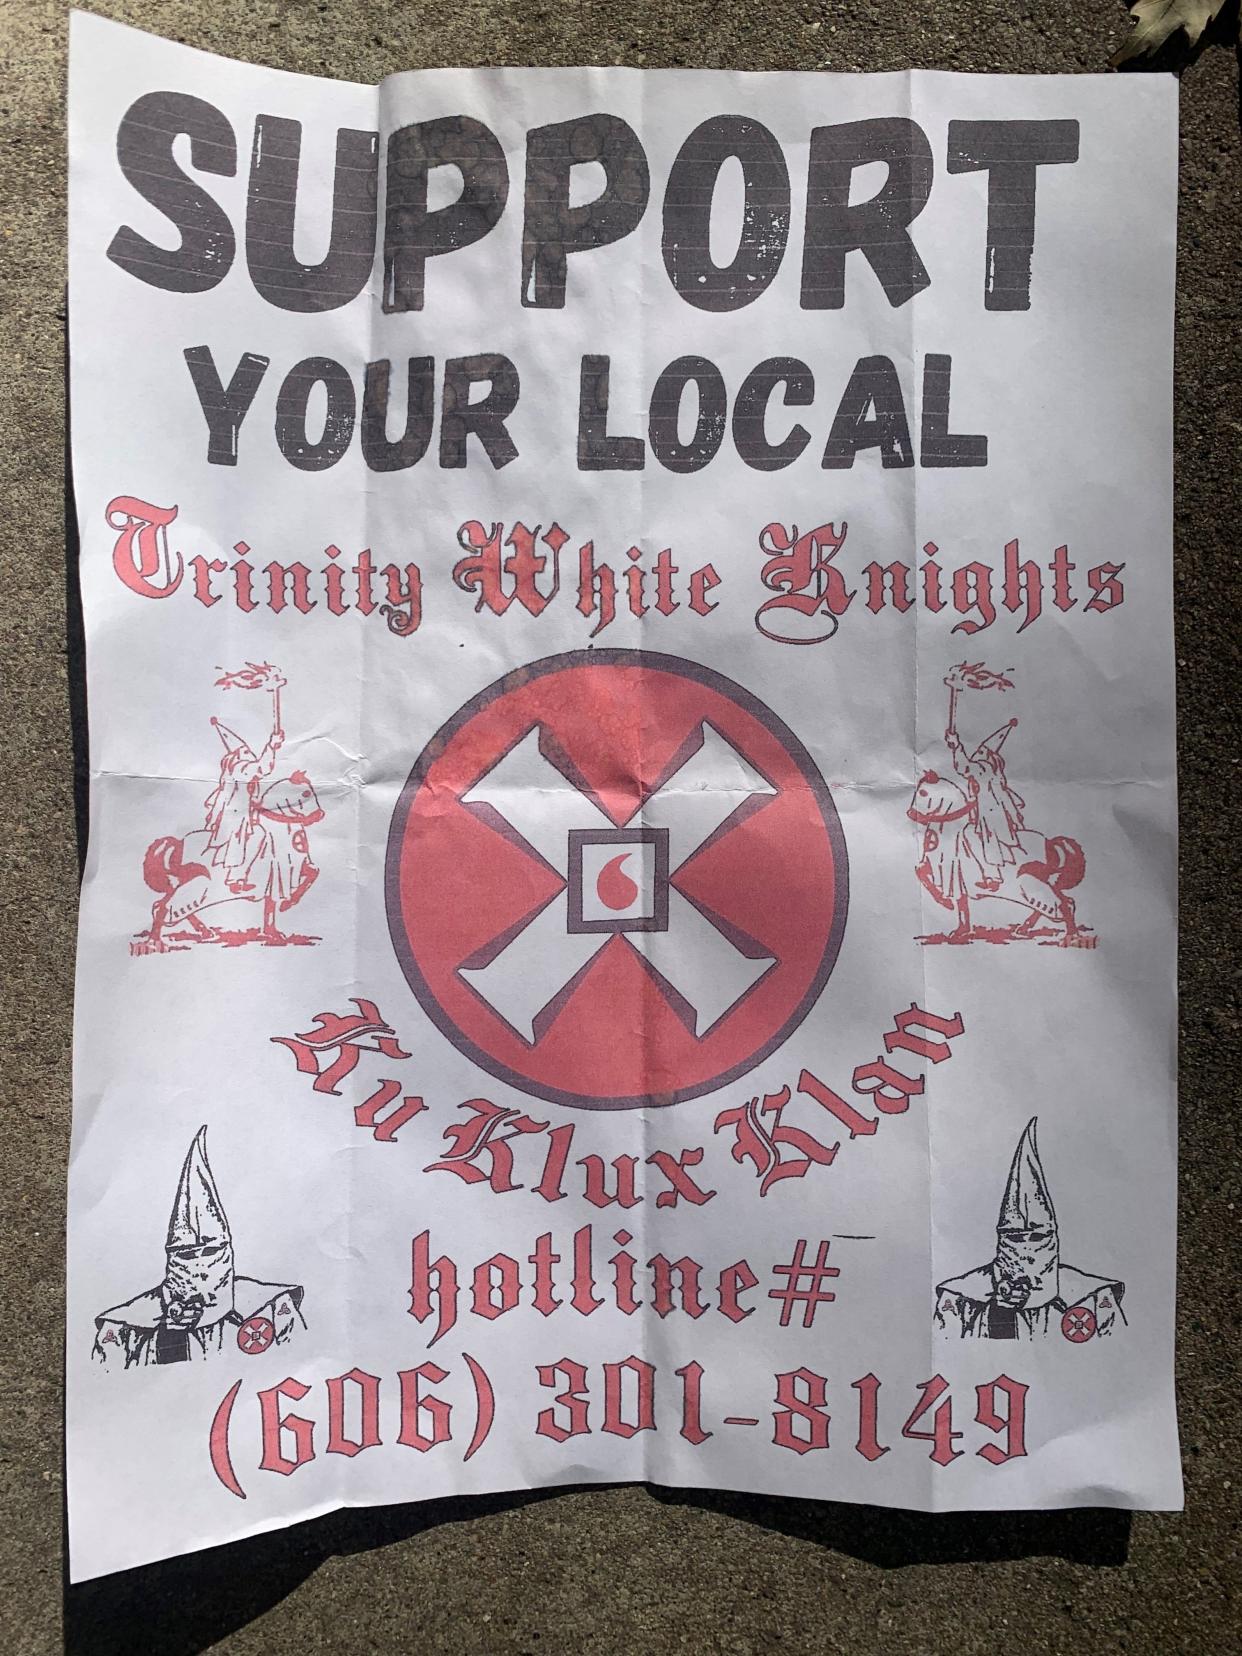 KKK flyers were sent to homes in Carmel and Fishers